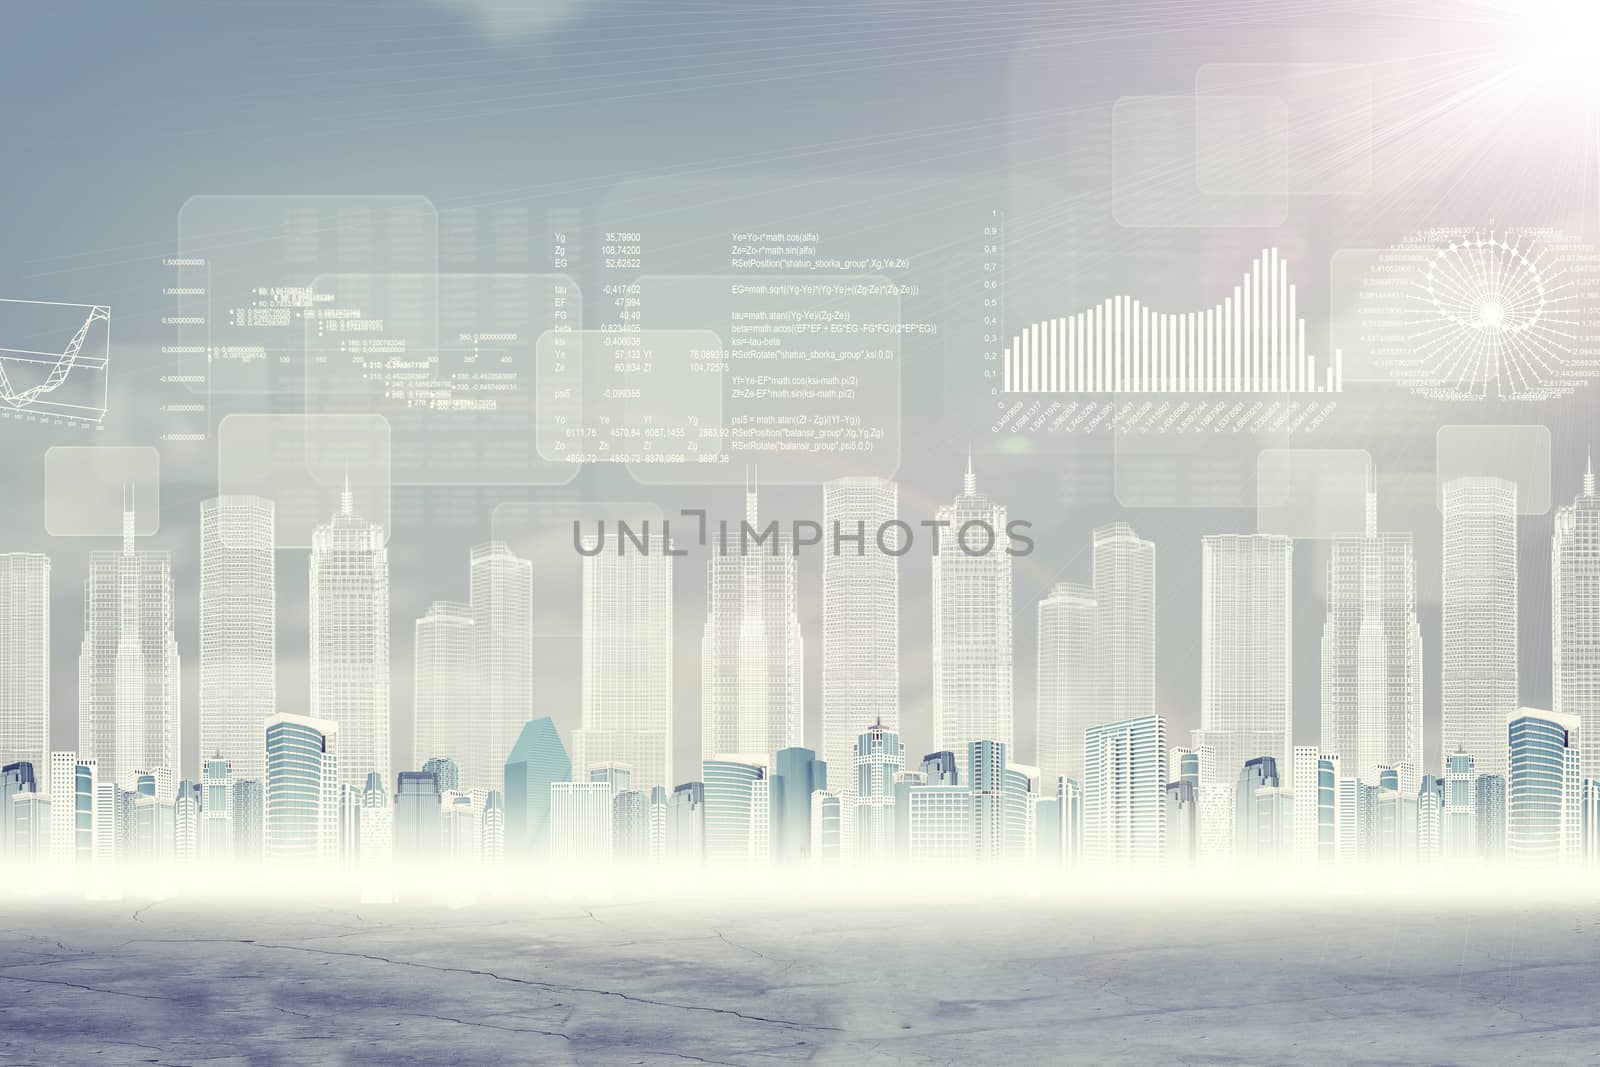 Abstract virtual background with cityscape and graphical charts